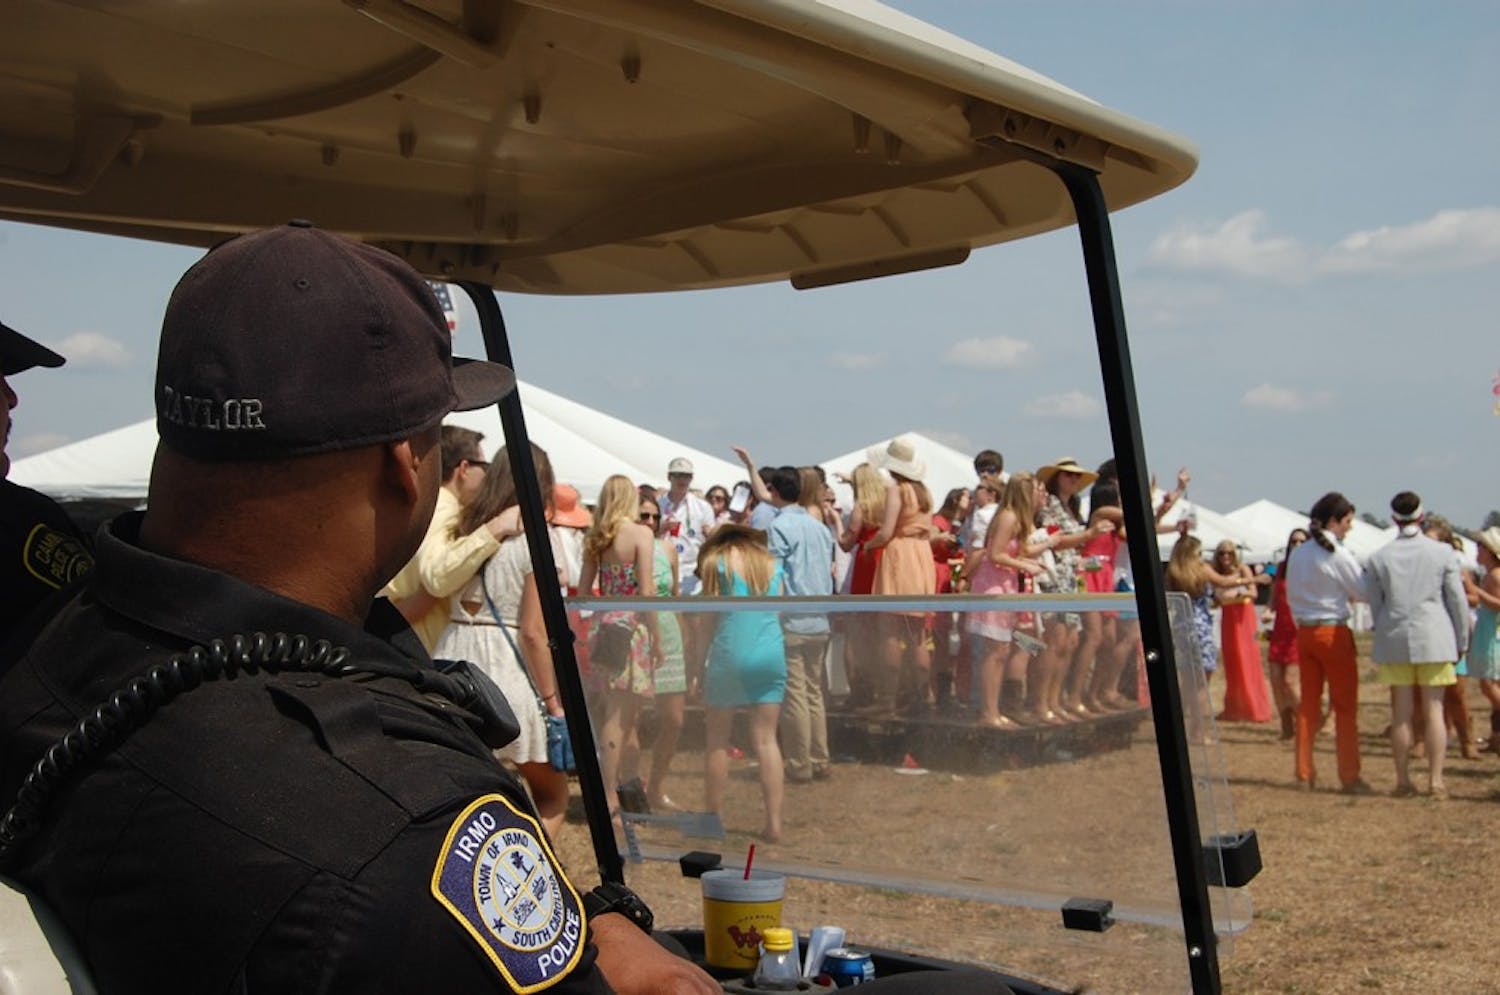 	More police were out and about in Camden this year at the annual Carolina Cup held Saturday.